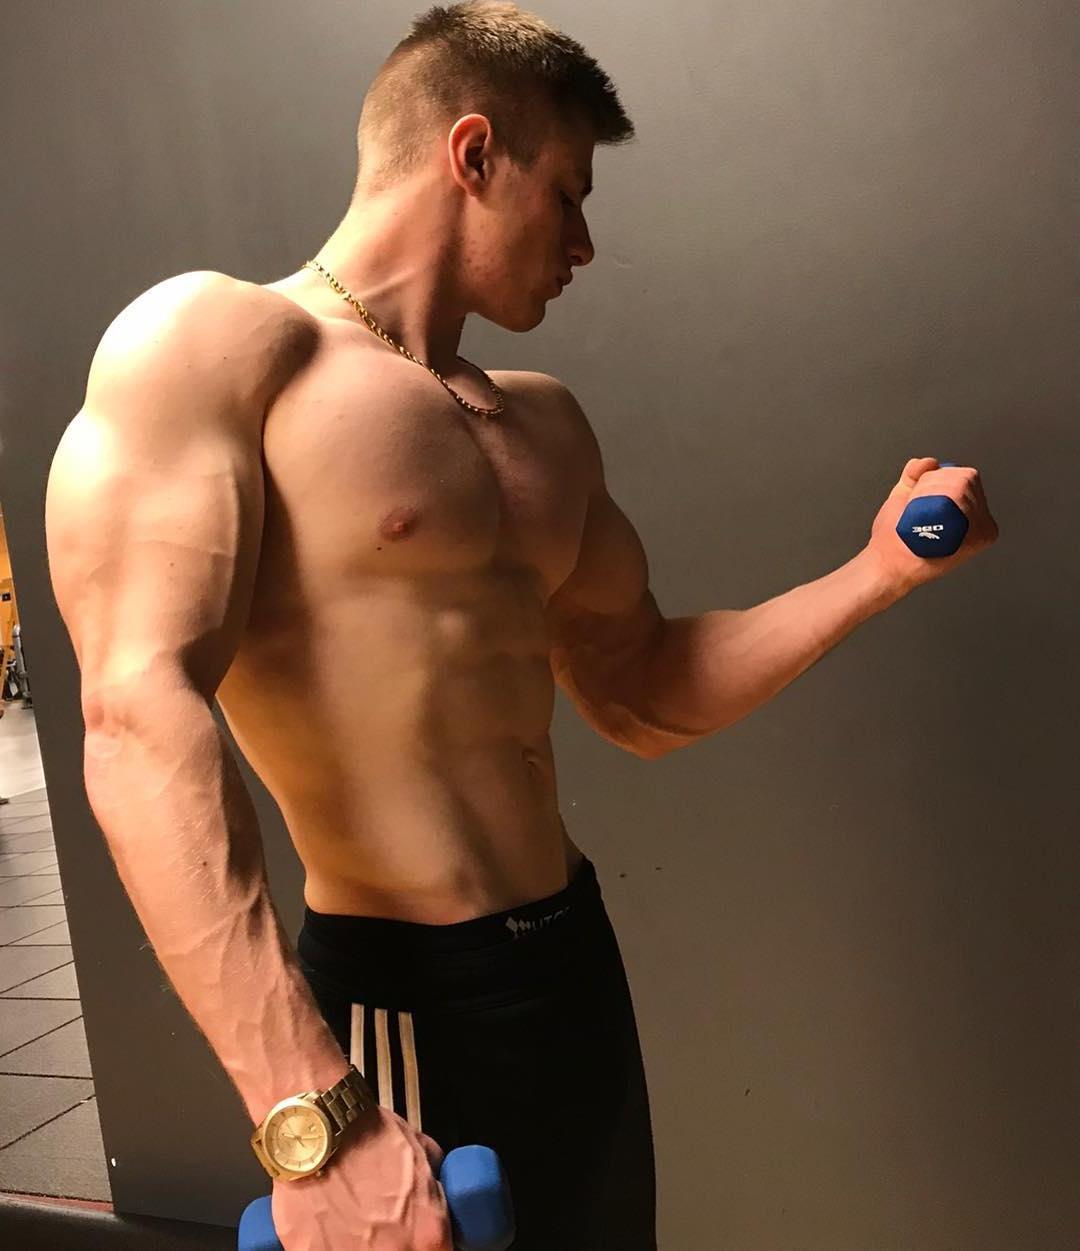 huge-young-shirtless-muscle-bro-big-veiny-biceps-sexy-college-stud